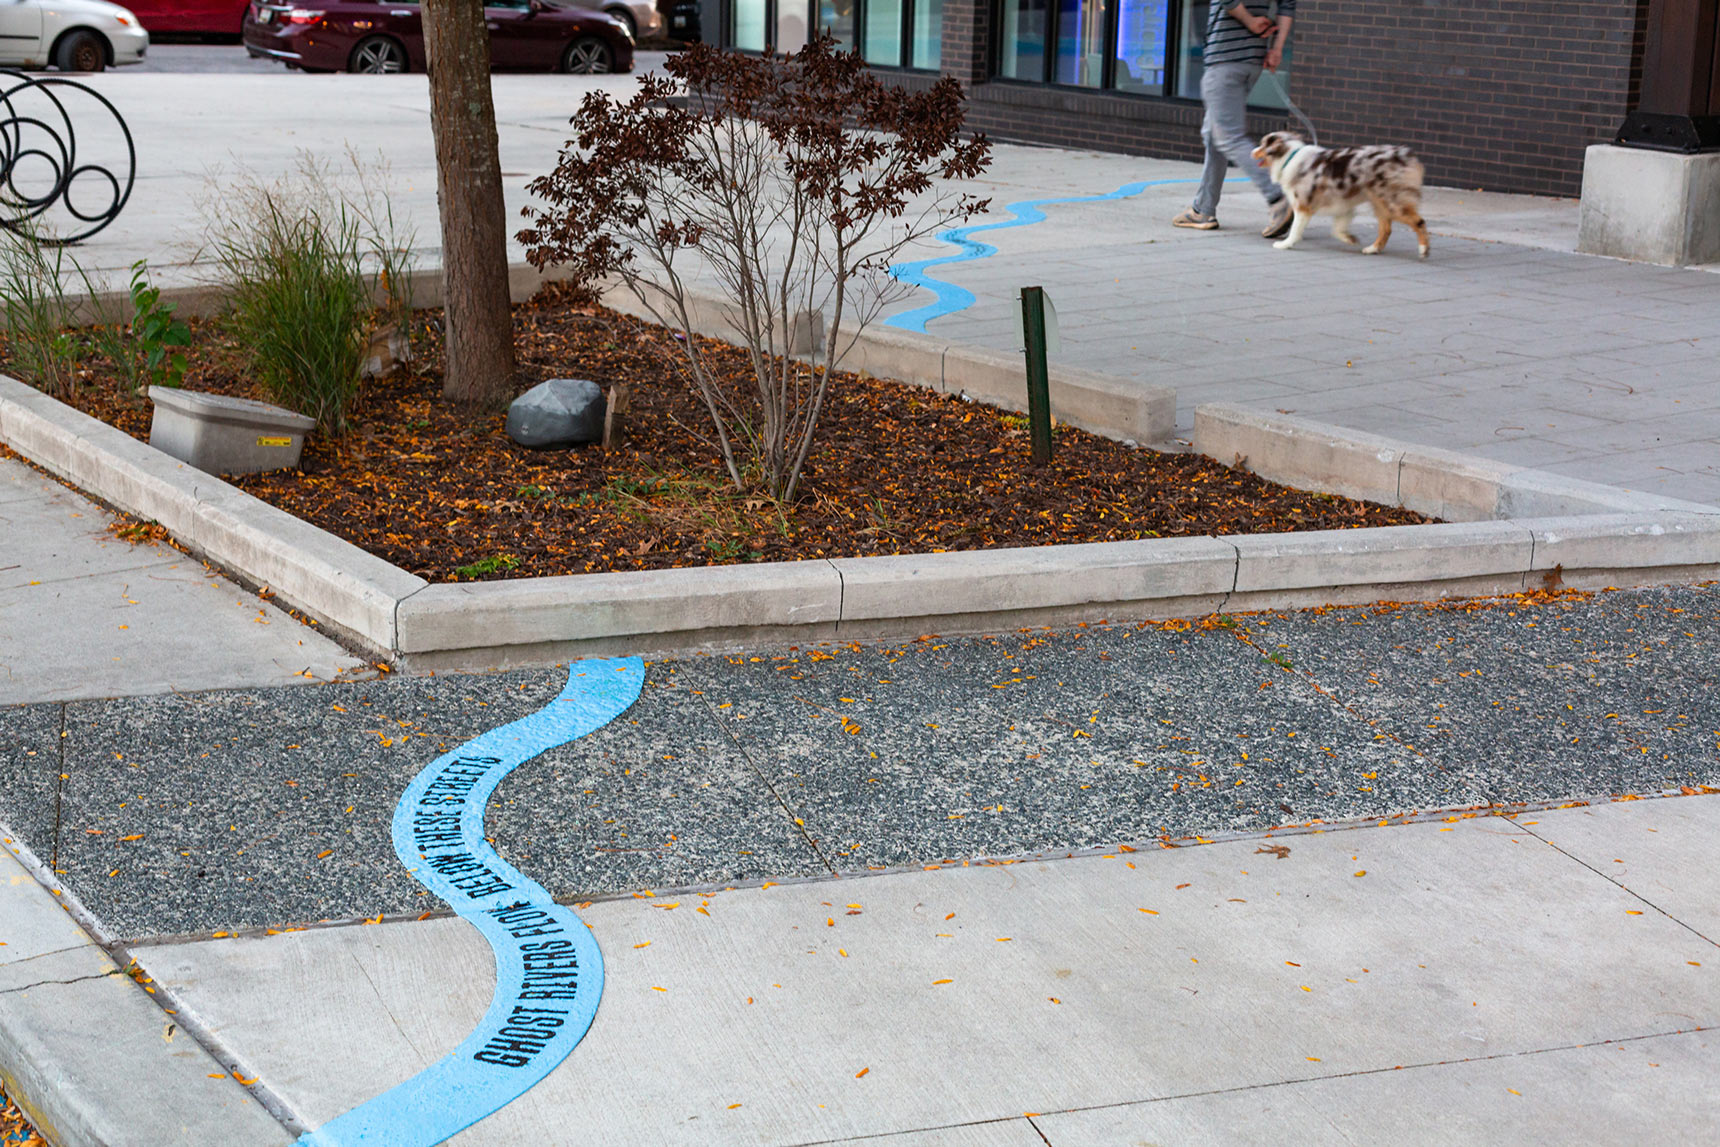 Photo of a public art installation mapping the path of an underground stream. A bright blue wavy line crosses a sidewalk and dead-ends at a building. A dog walker passes by in the background.